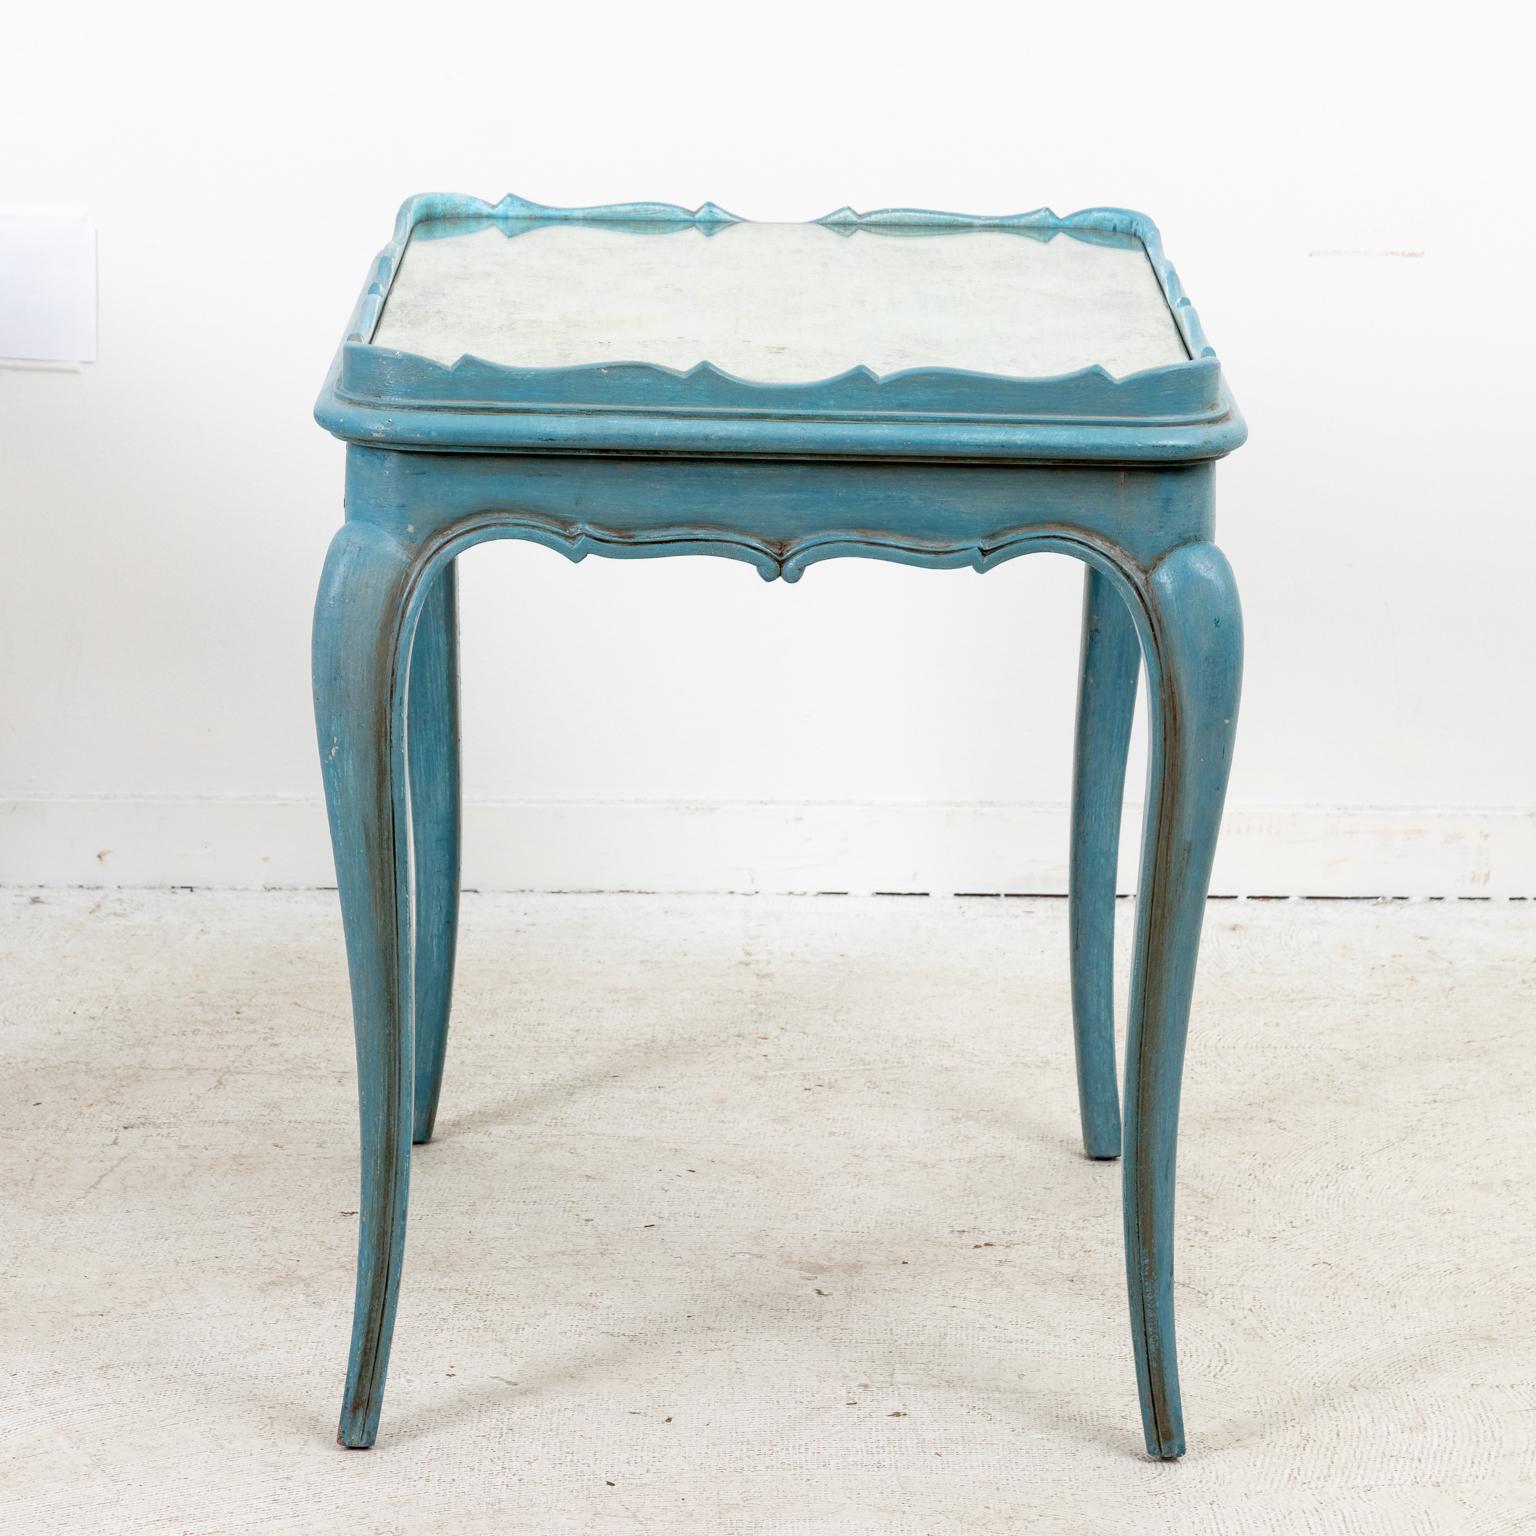 Circa mid-20th century pair of soft blue painted Louis XVI style side tables with carved scallop shells on the skirt and mirrored table tops with rounded corners and curved gallery . The tables also feature cabriole turned legs. Please note of wear